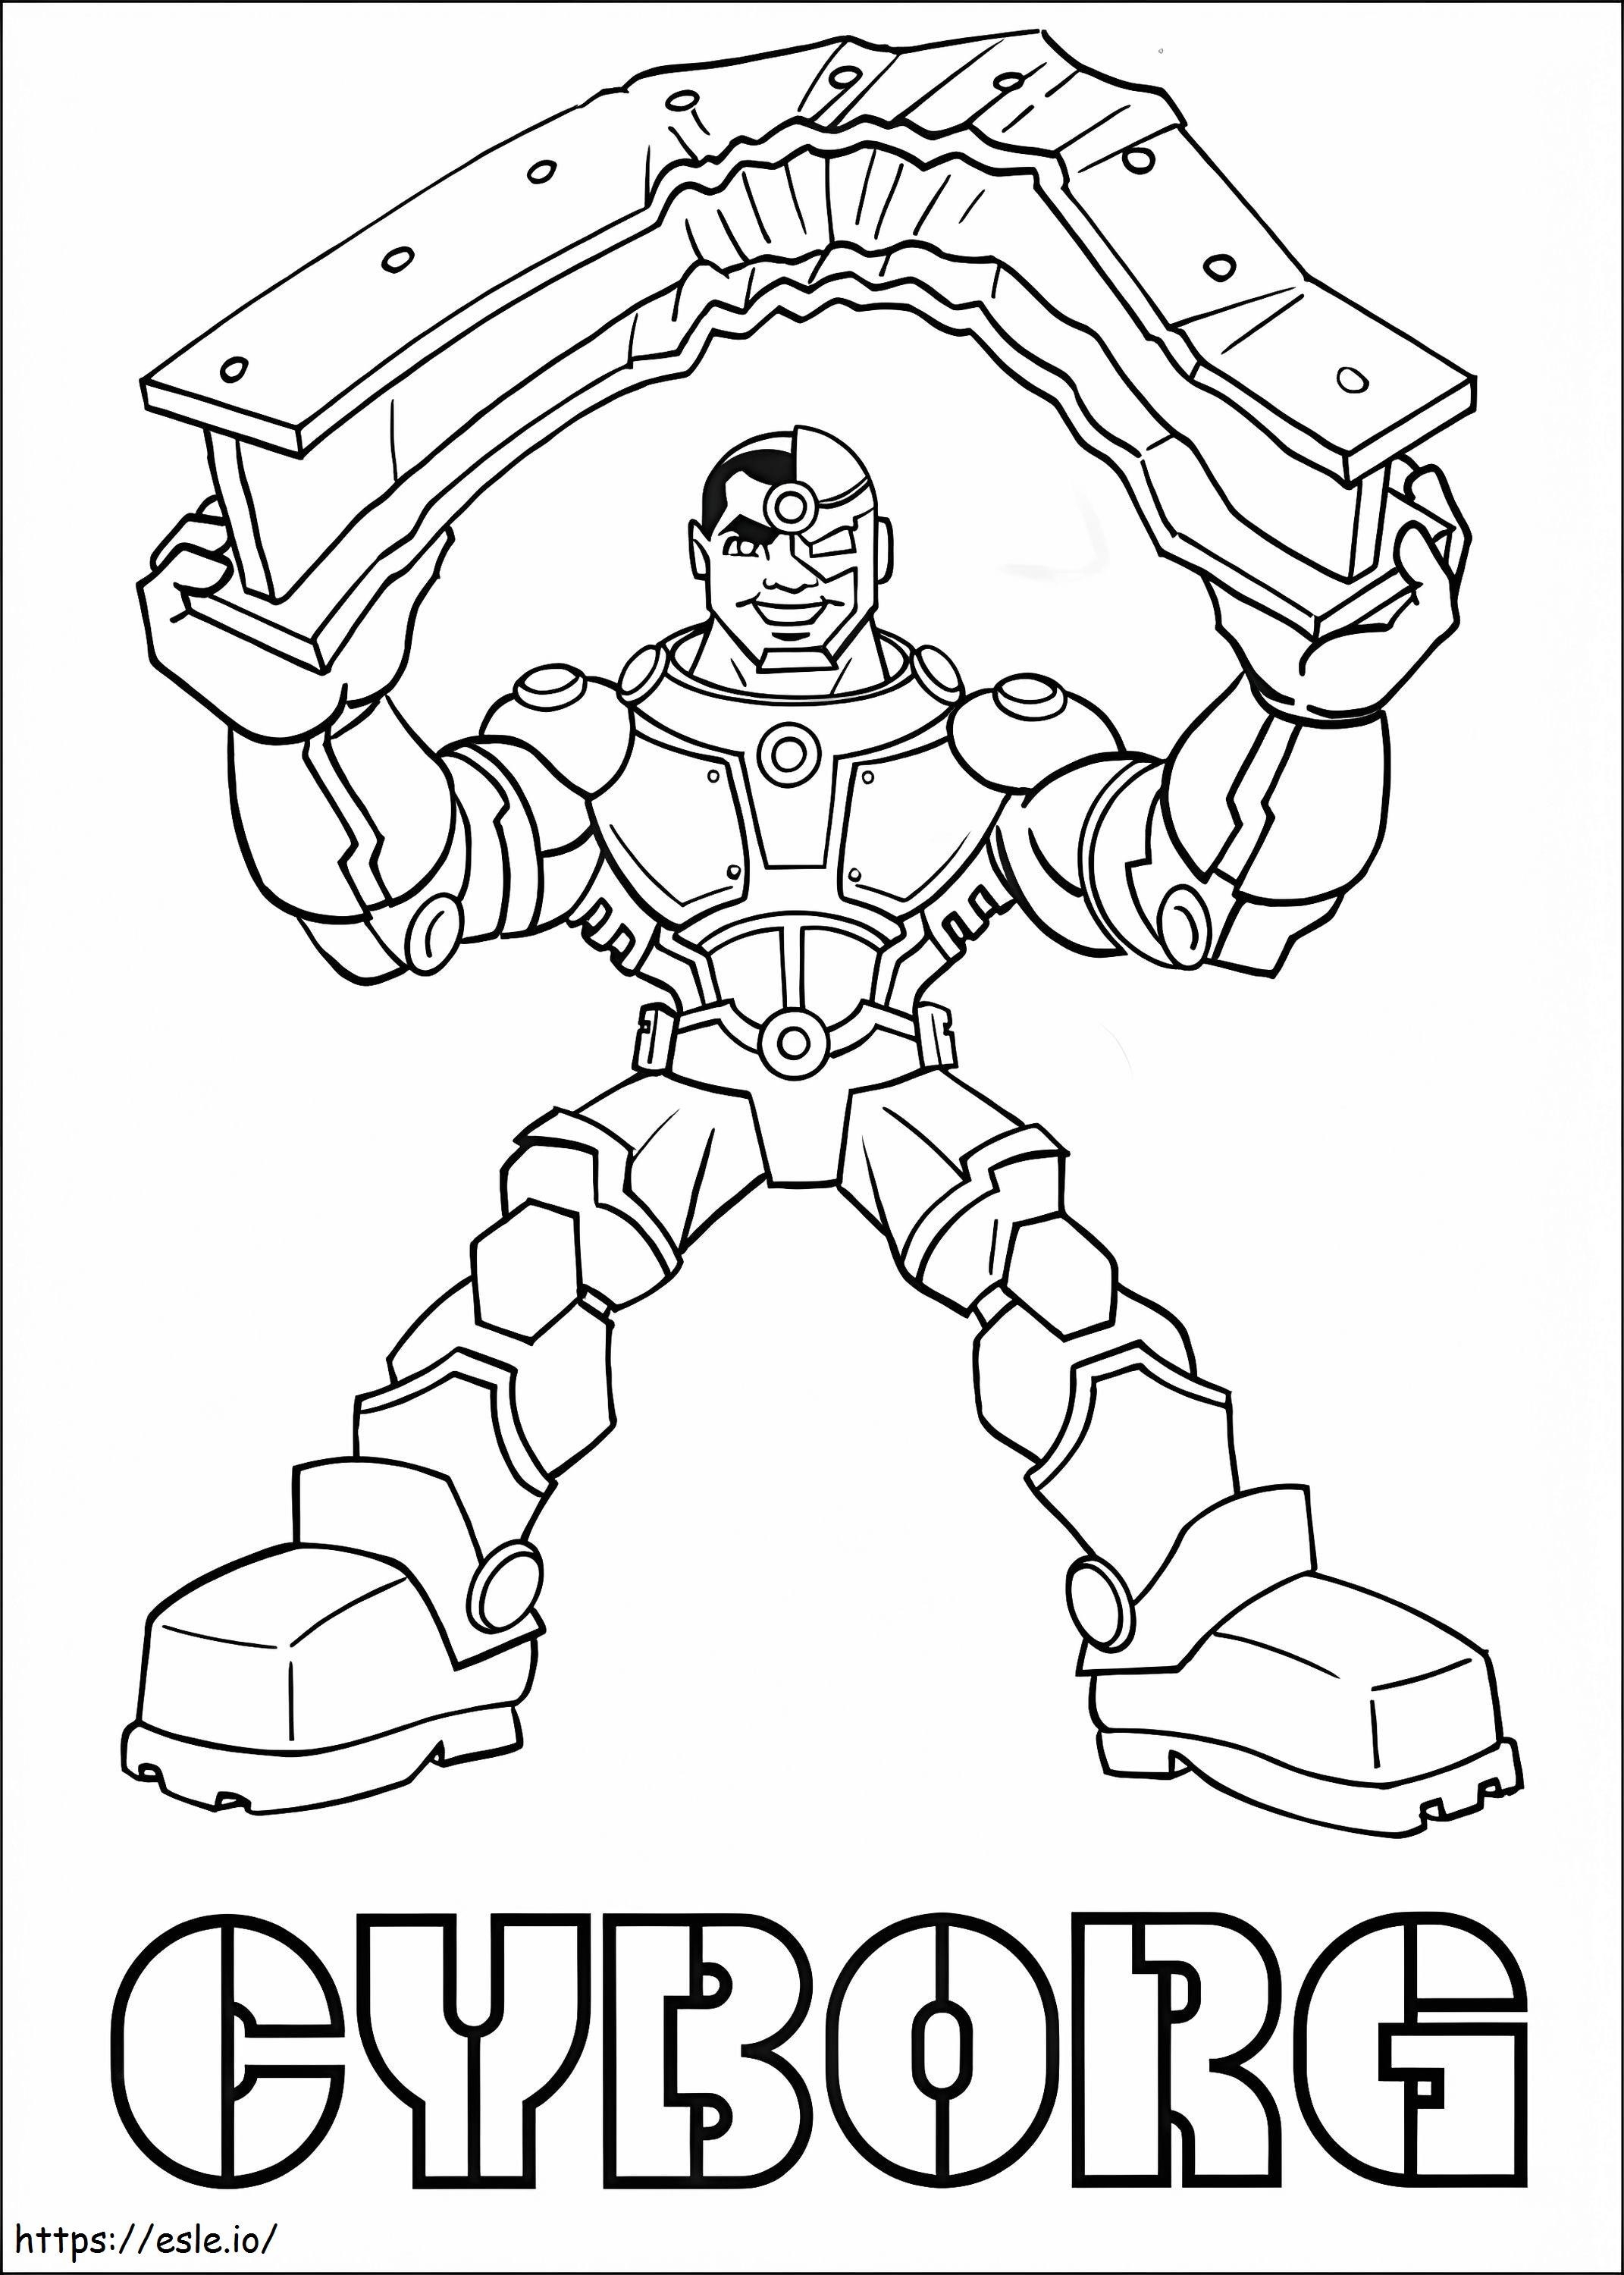 Cyborg Fuerte coloring page